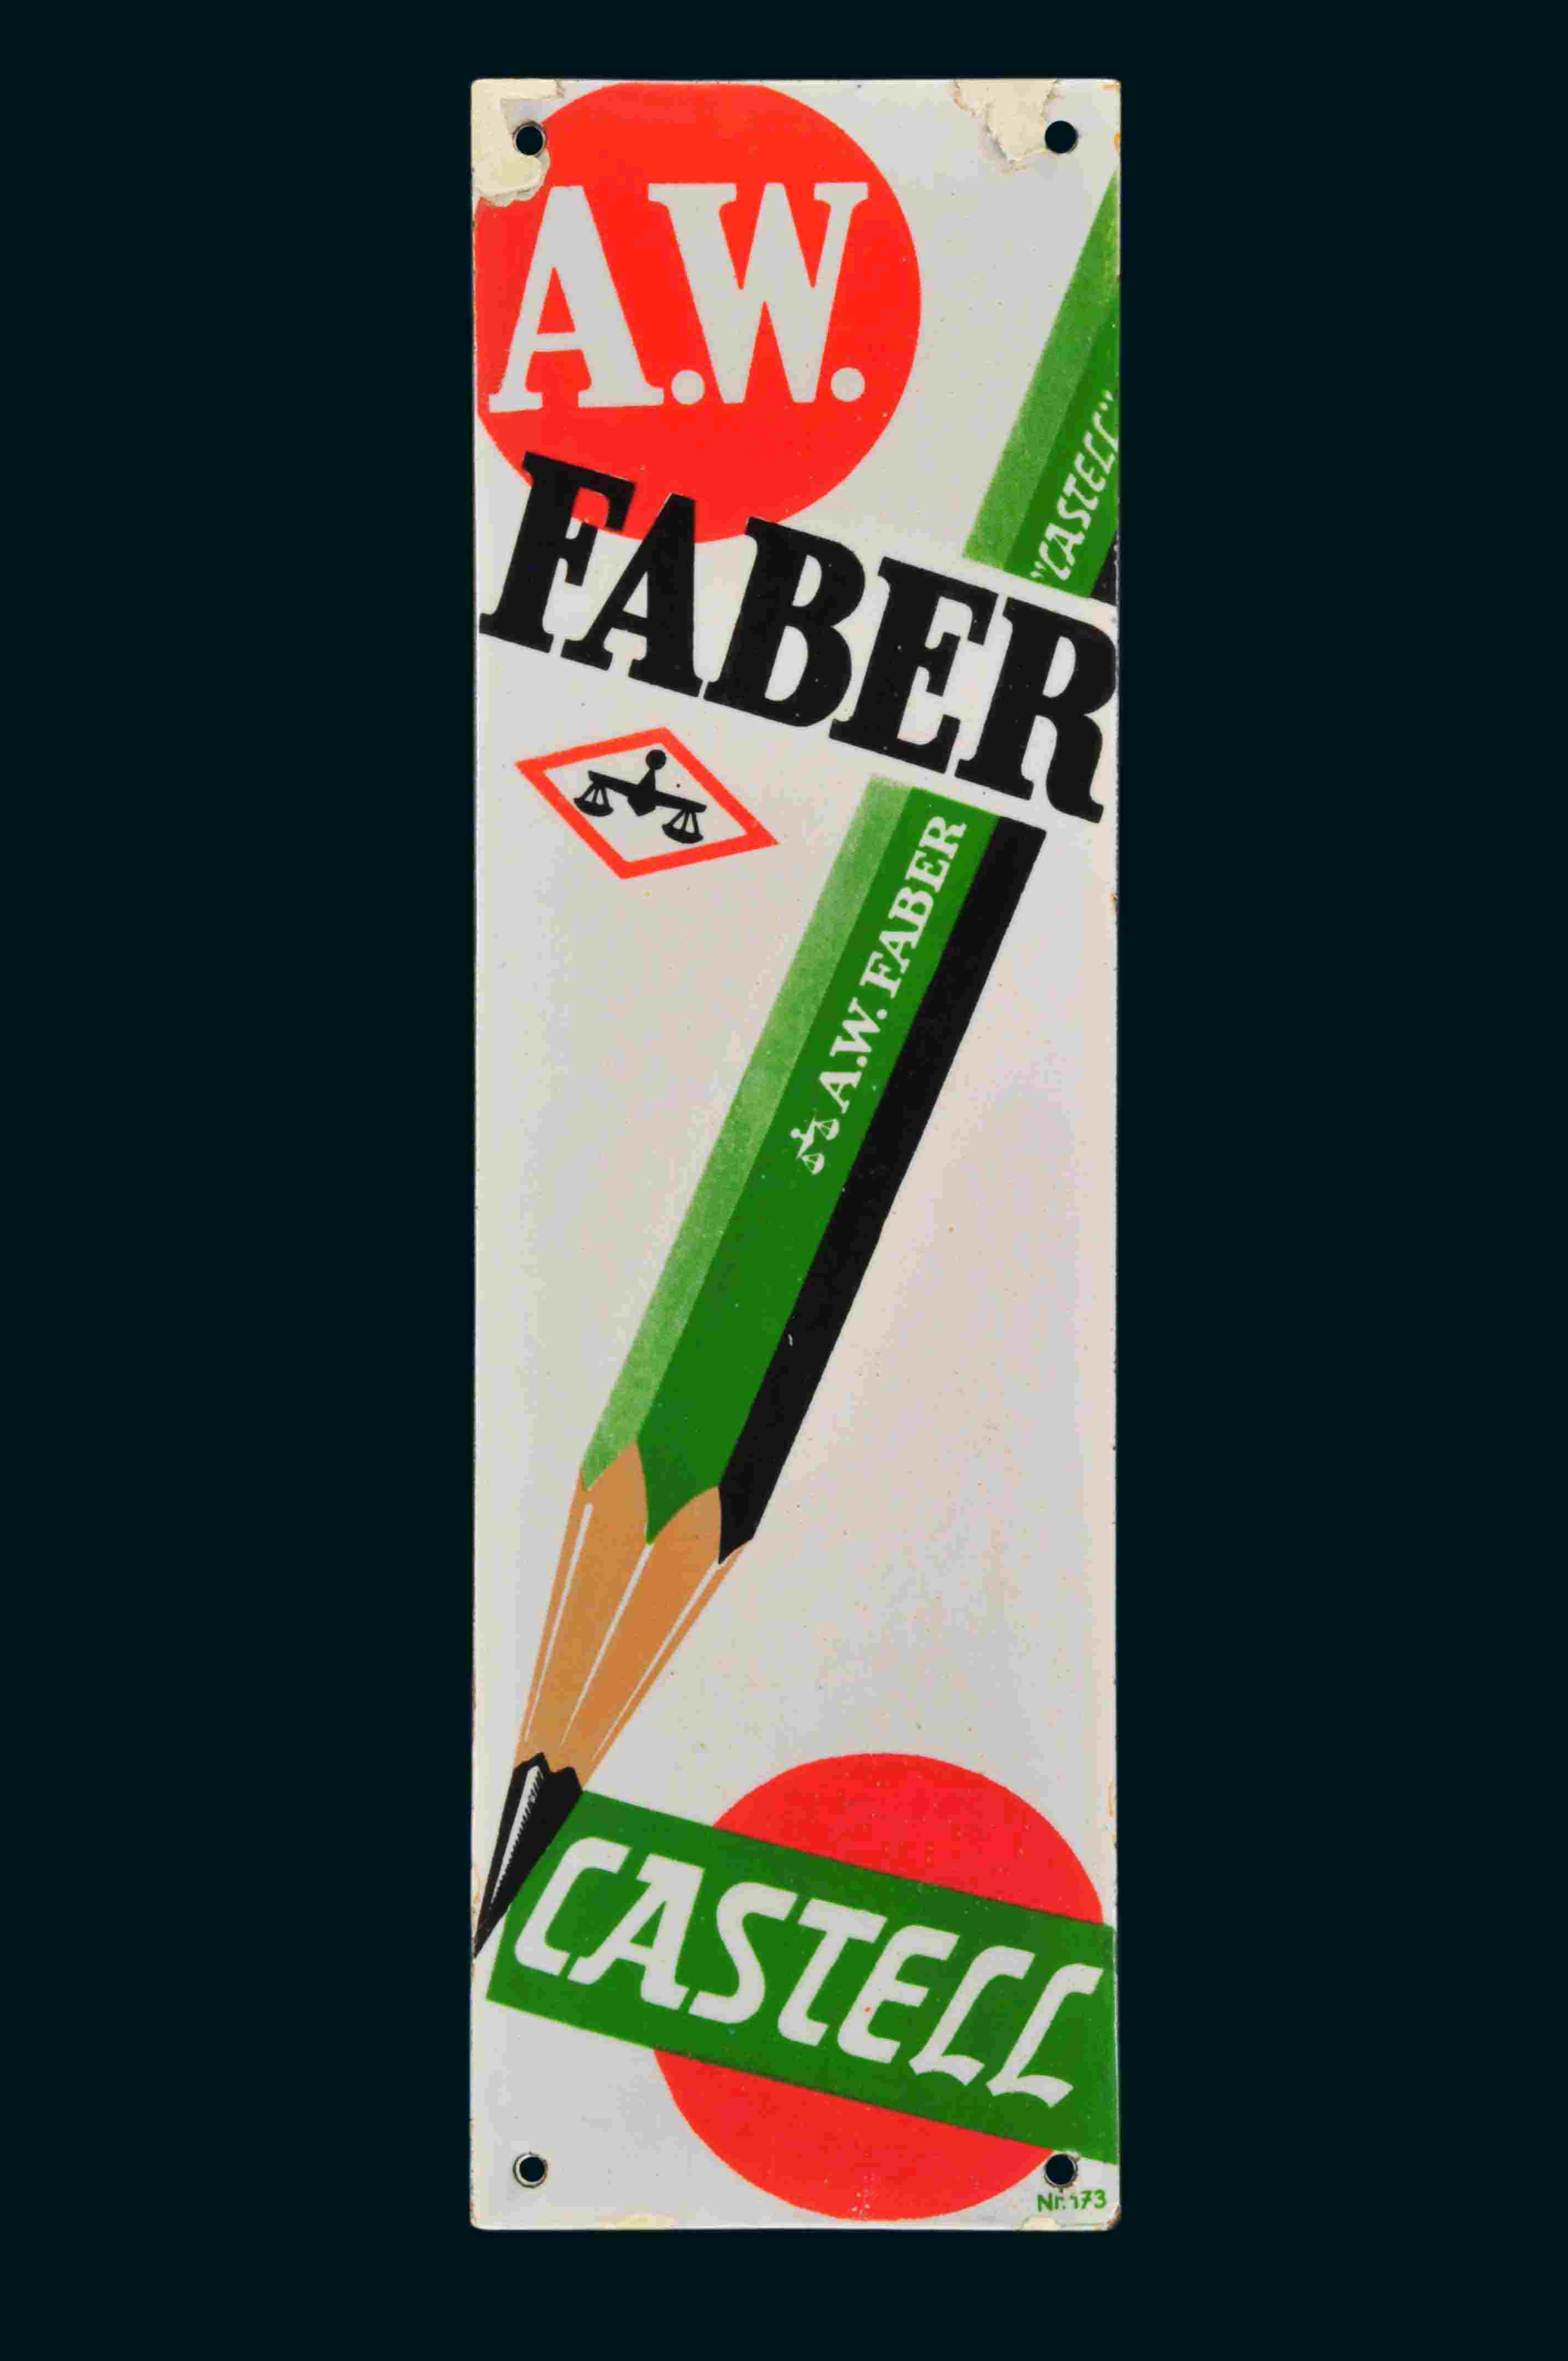 A. W. Faber Castell 